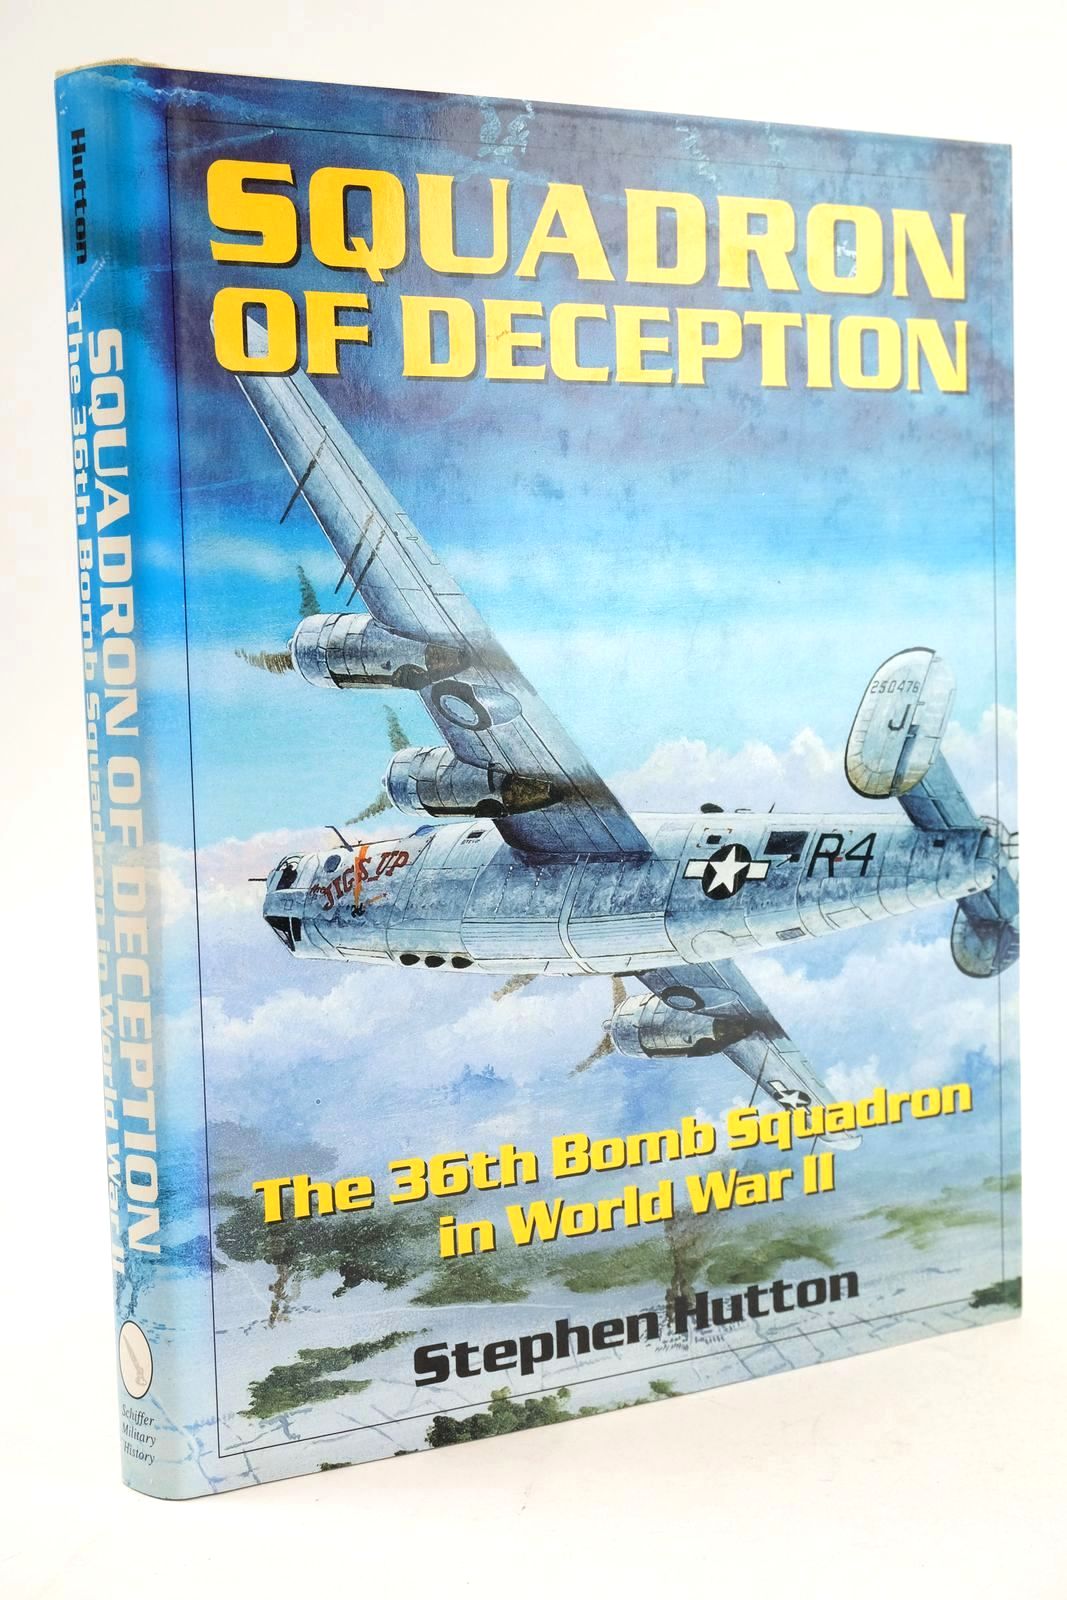 Photo of SQUADRON OF DECEPTION - THE 36TH BOMB SQUADRON IN WORLD WAR II written by Hutton, Stephen McKenzie published by Schiffer Publishing Ltd. (STOCK CODE: 1325147)  for sale by Stella & Rose's Books